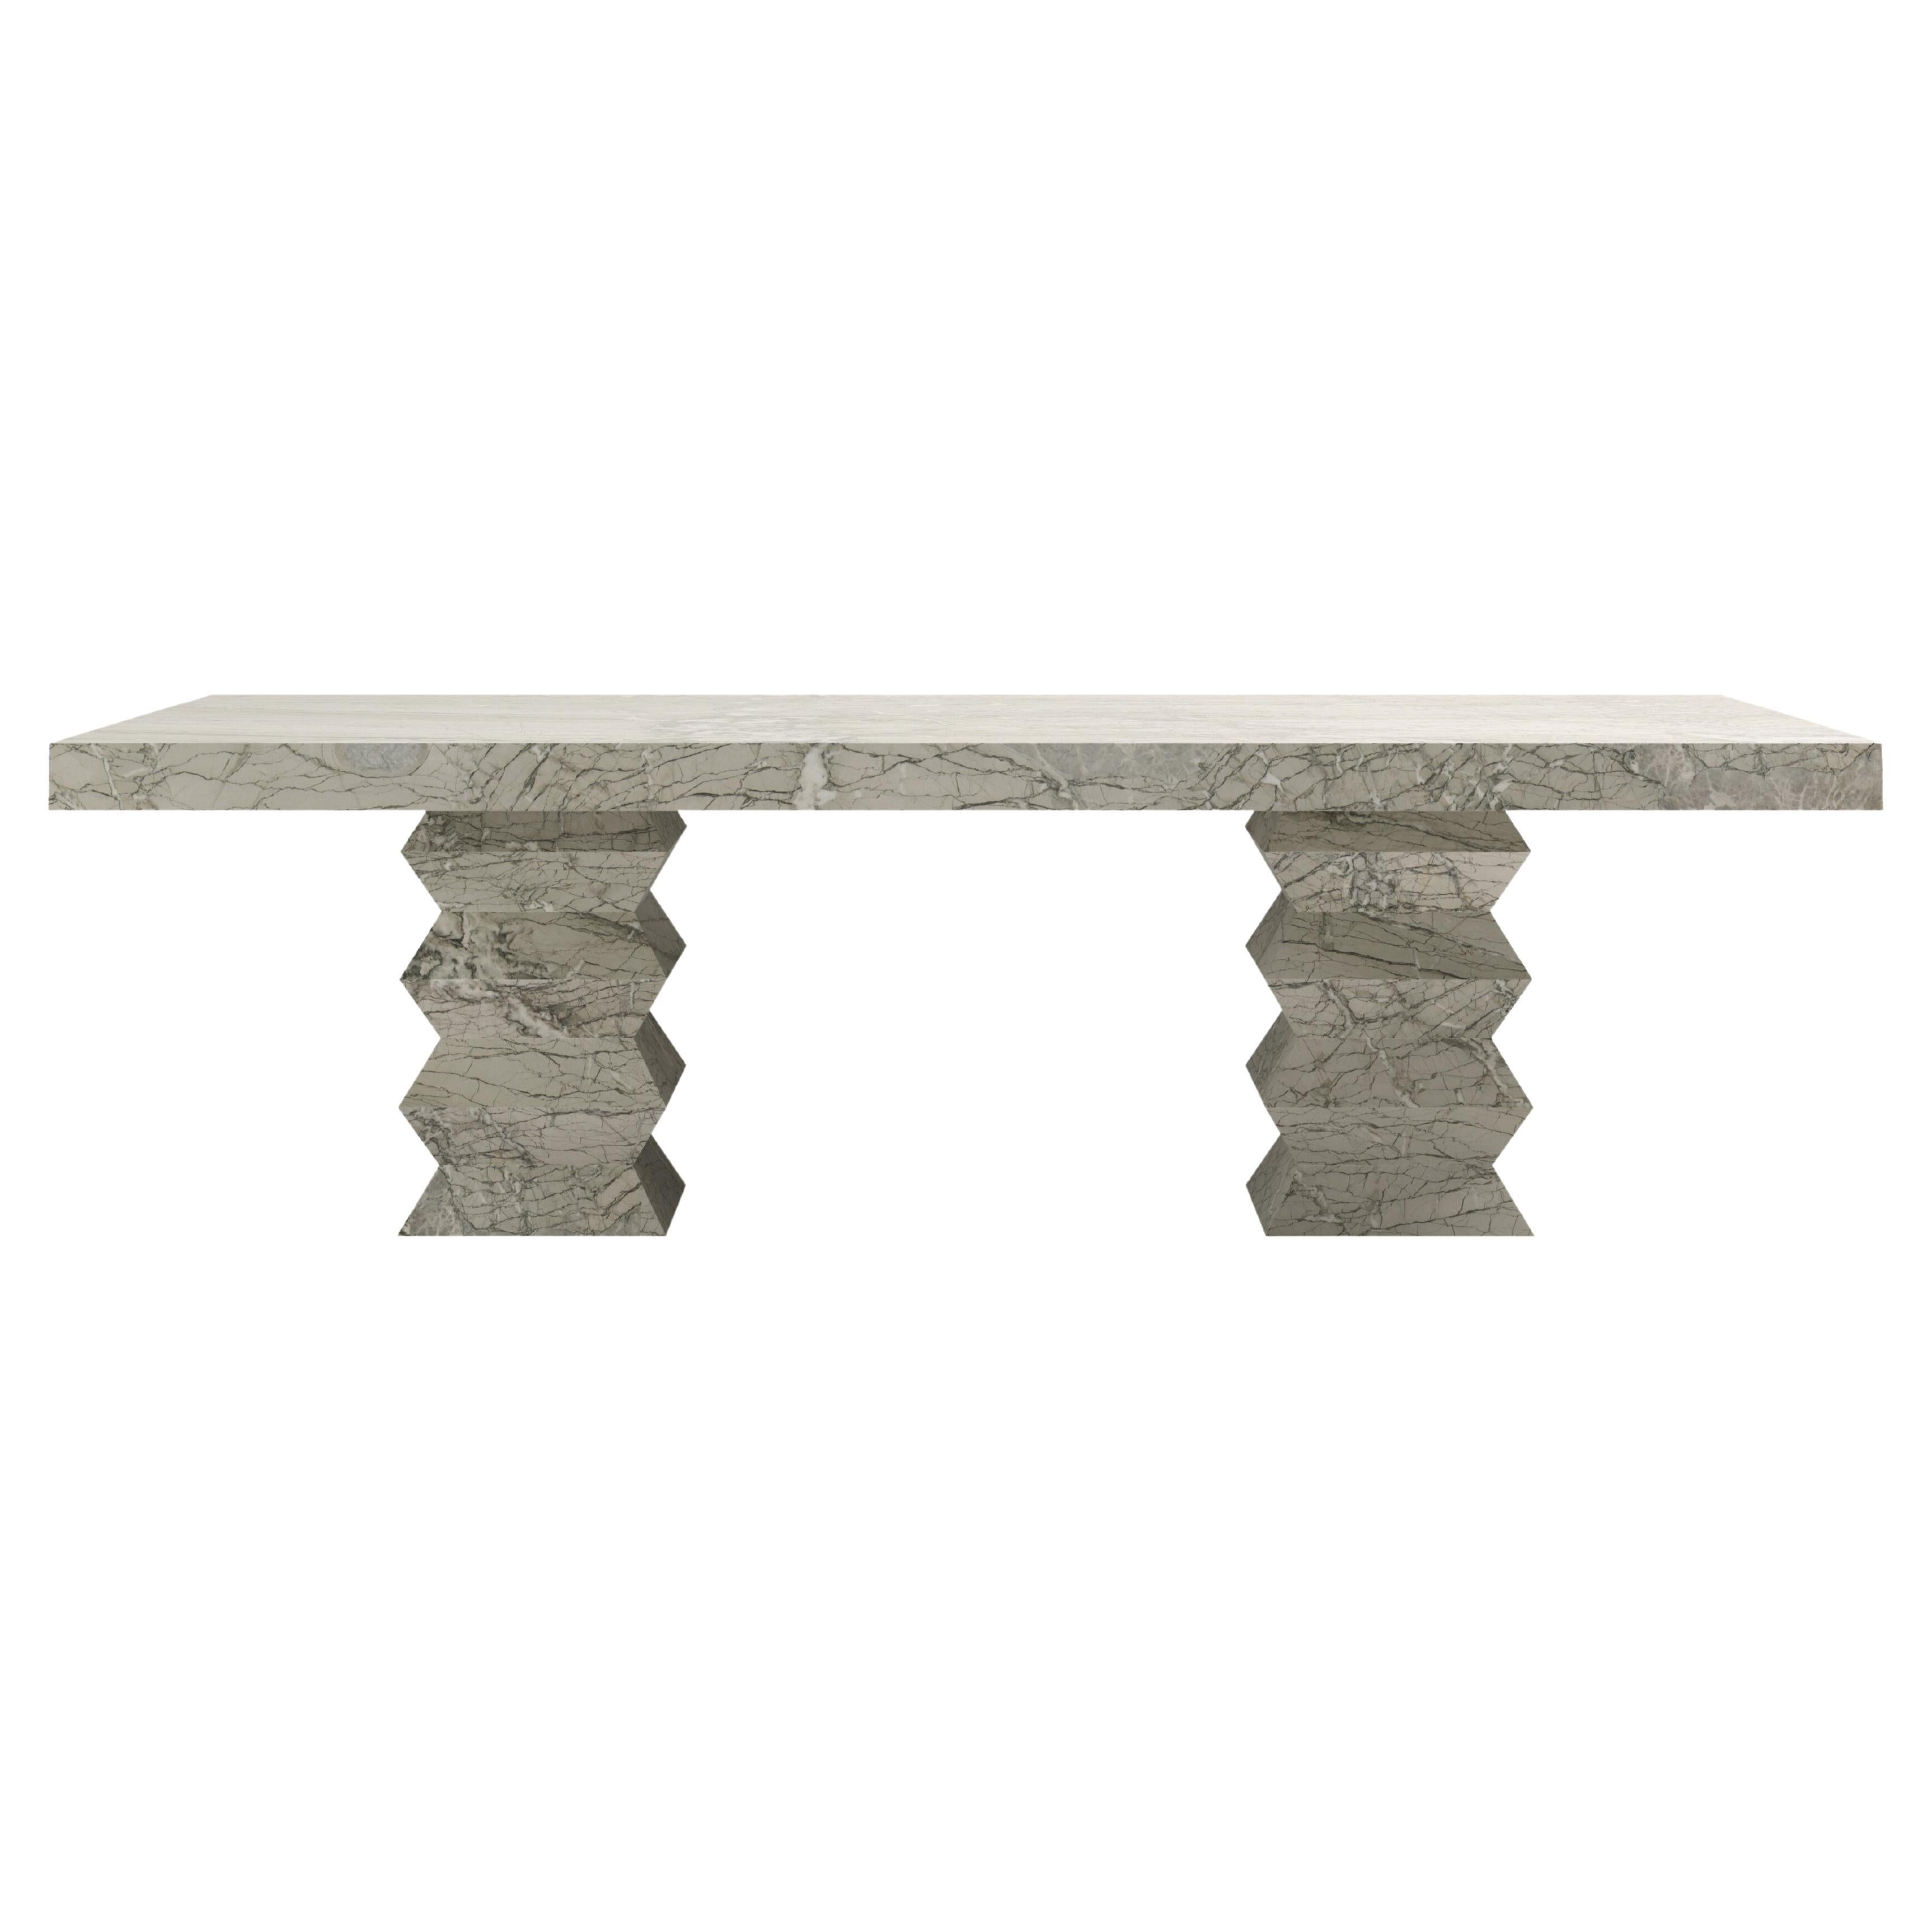 FORM(LA) Grinza Rectangle Dining Table 96"L x 42"W x 32"H Verde Antigua Marble For Sale